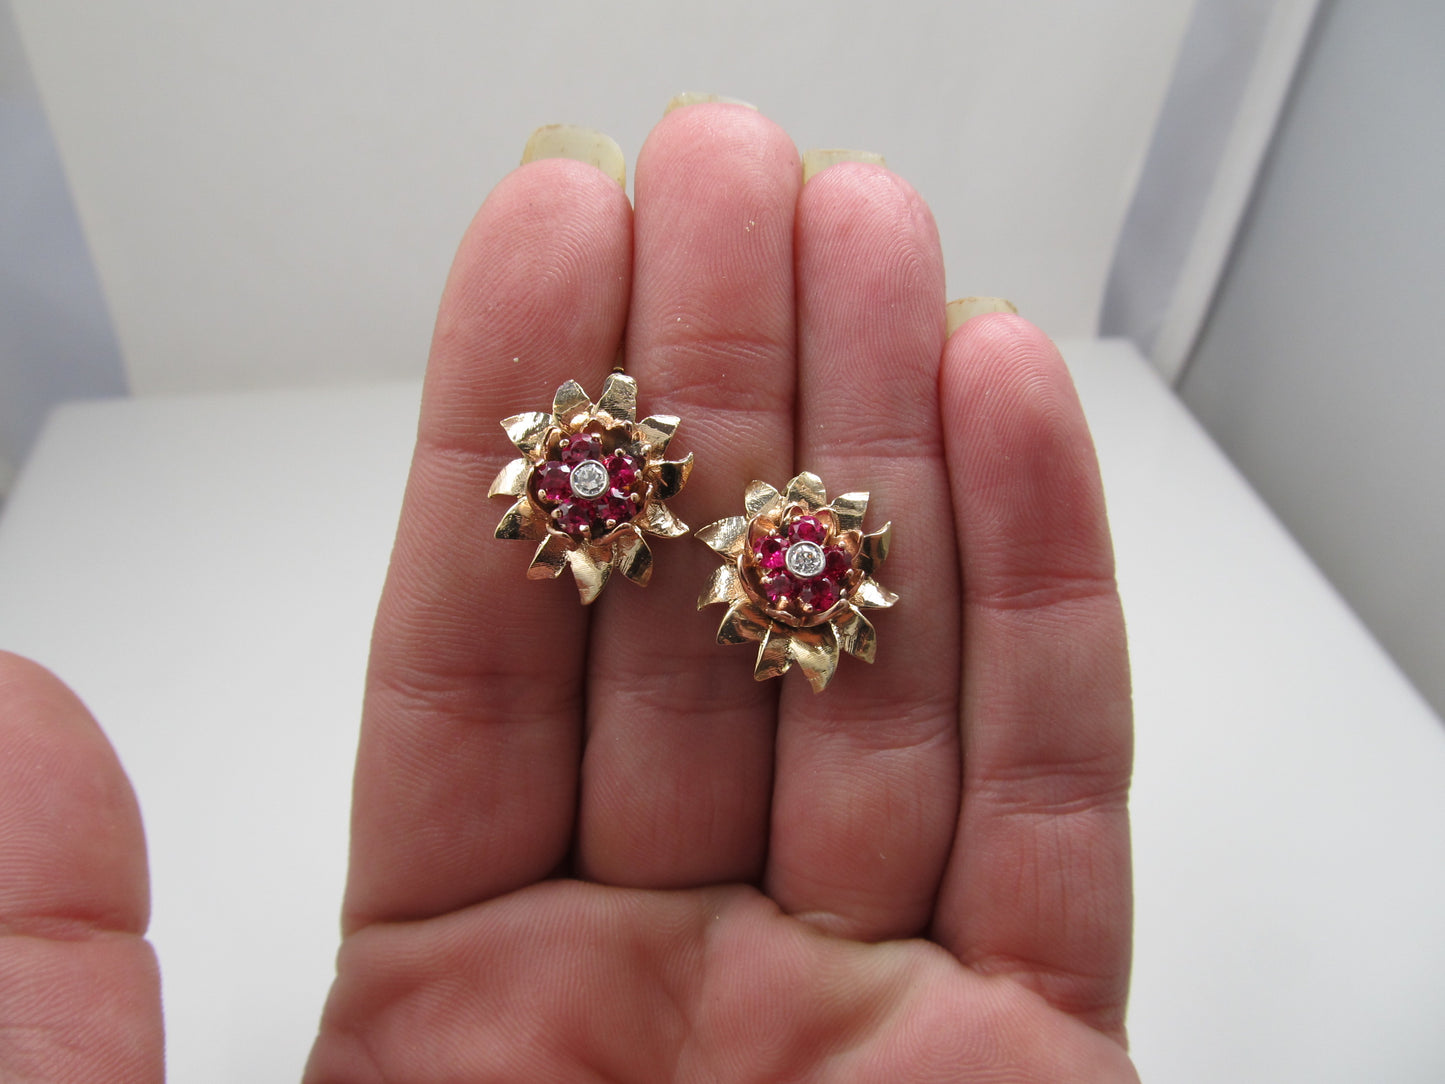 Vintage retro 14k rose gold earrings with rubies and diamonds